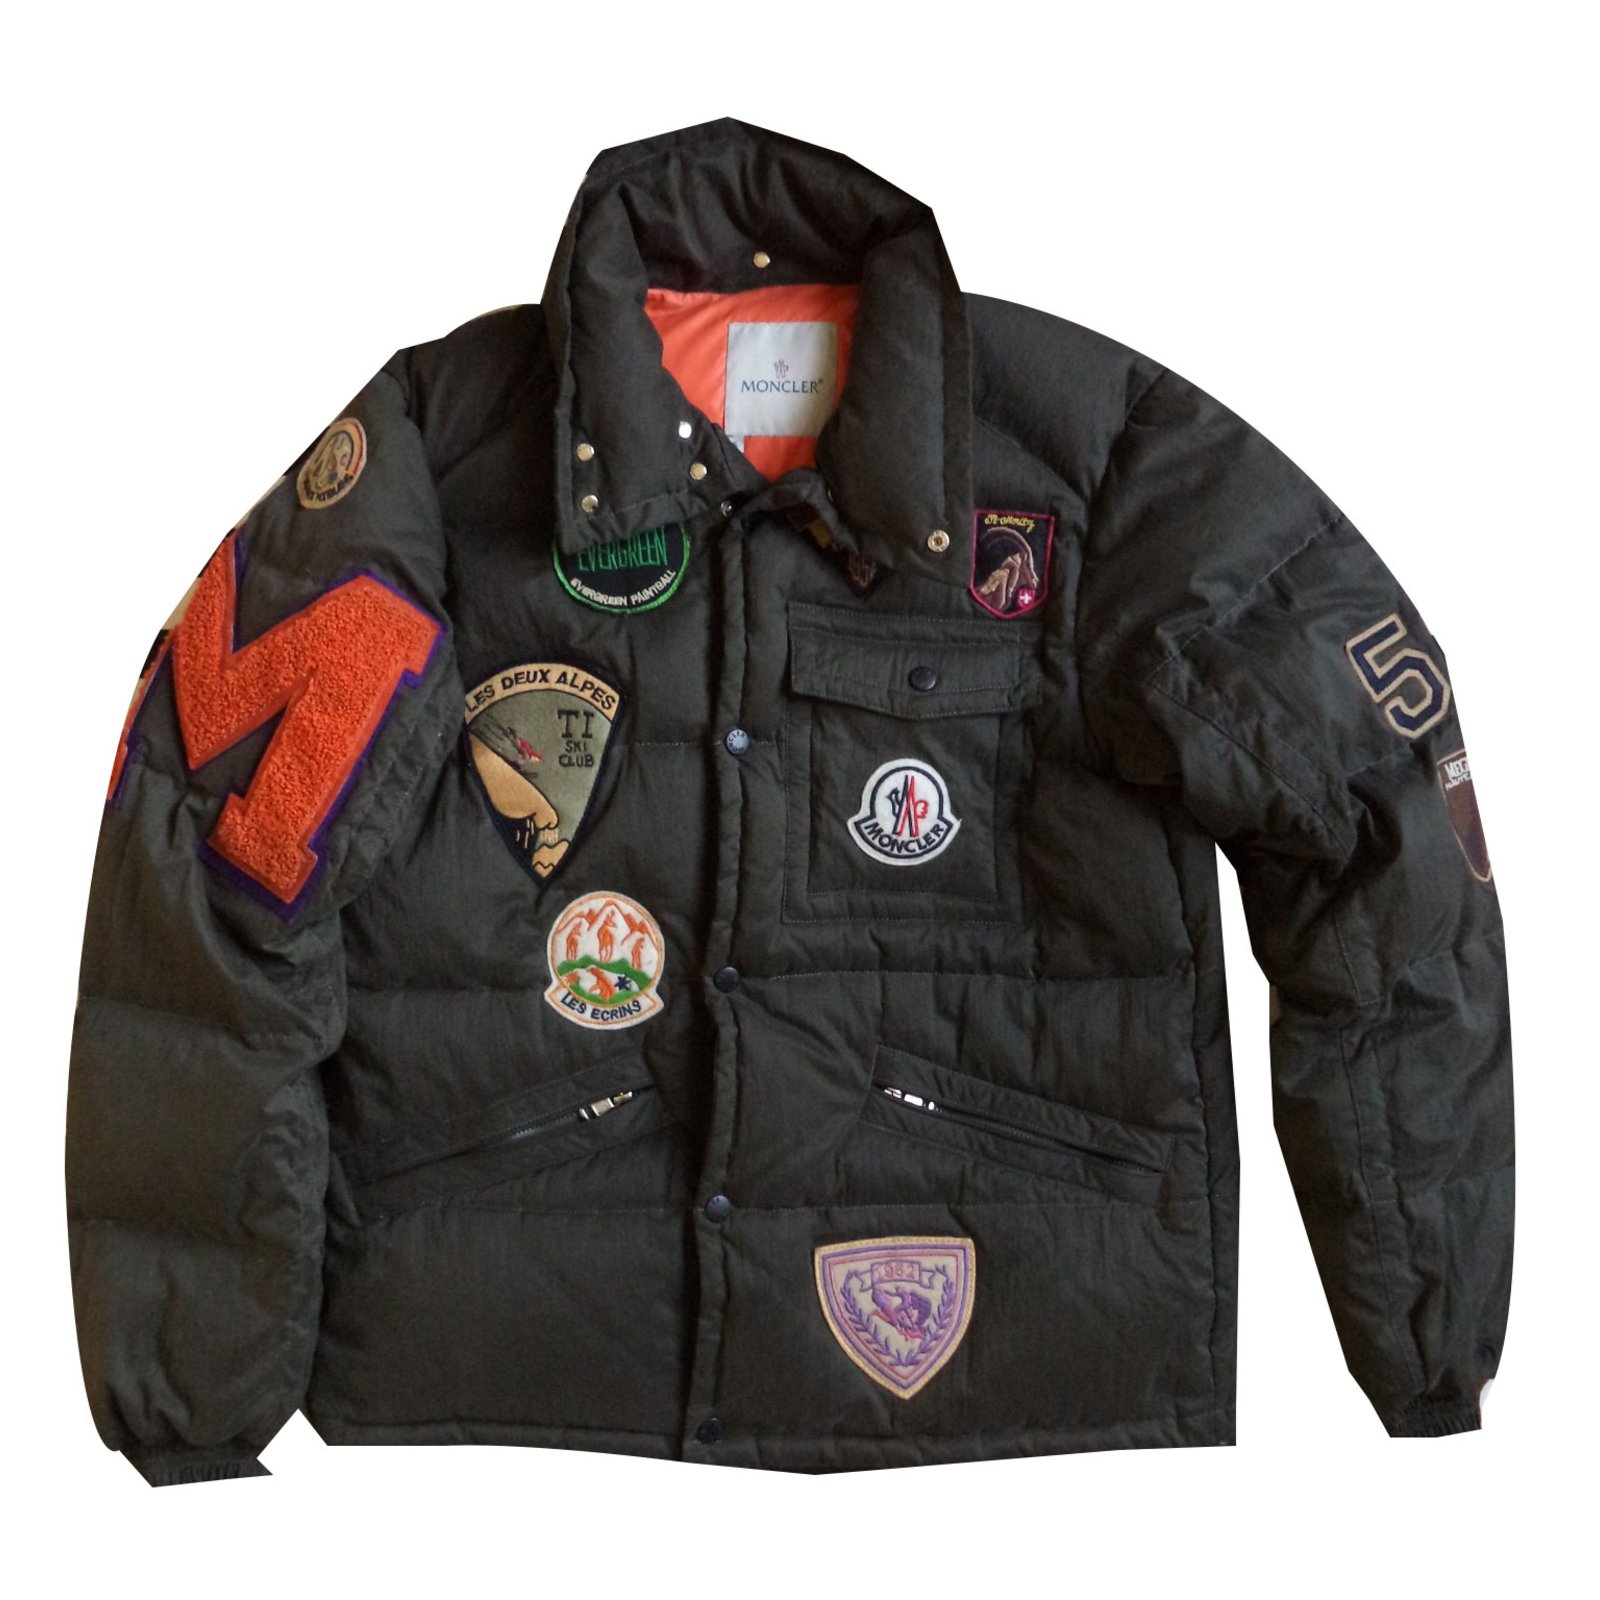 moncler jacket with patches